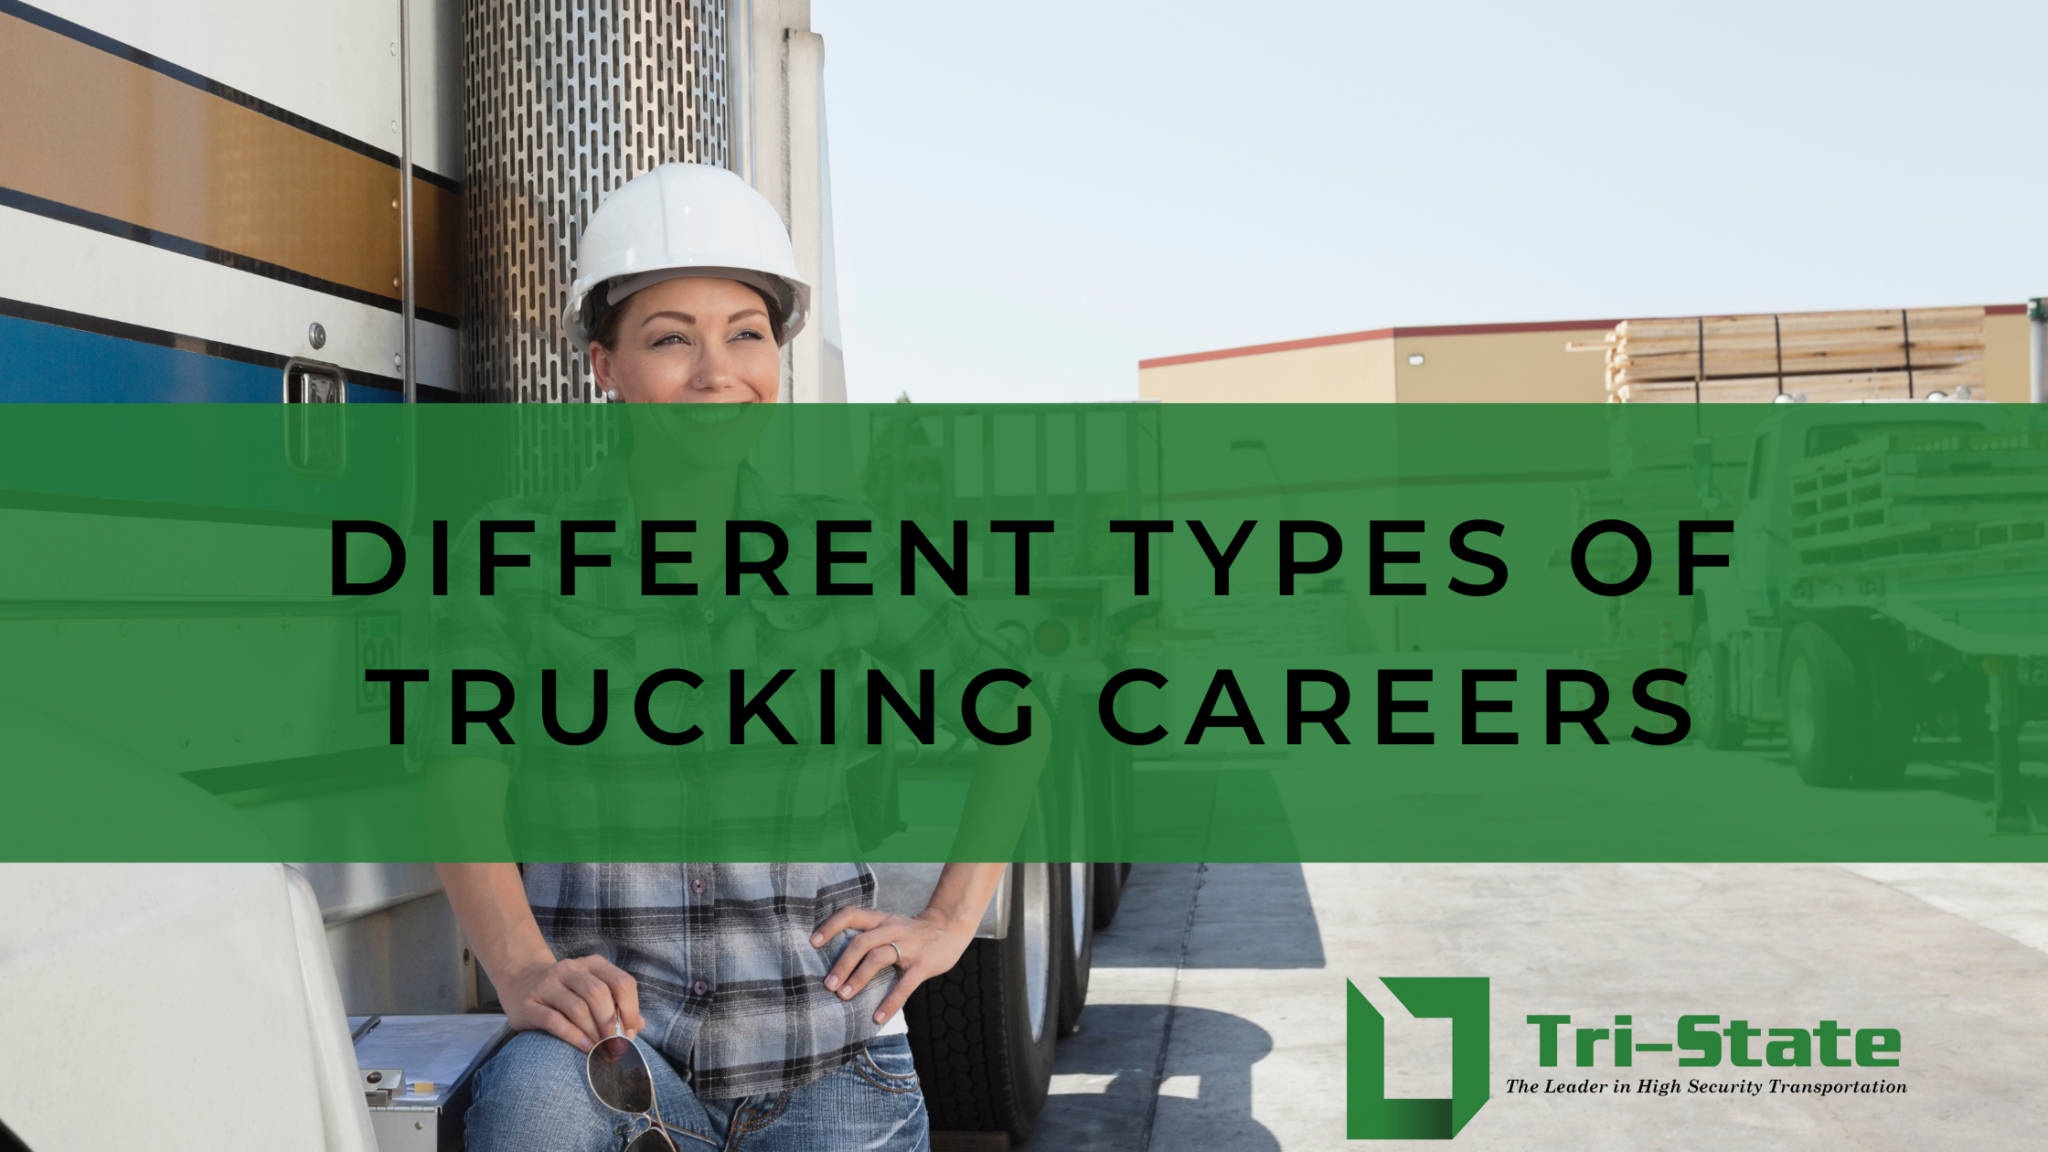 Different Types of Trucking Careers